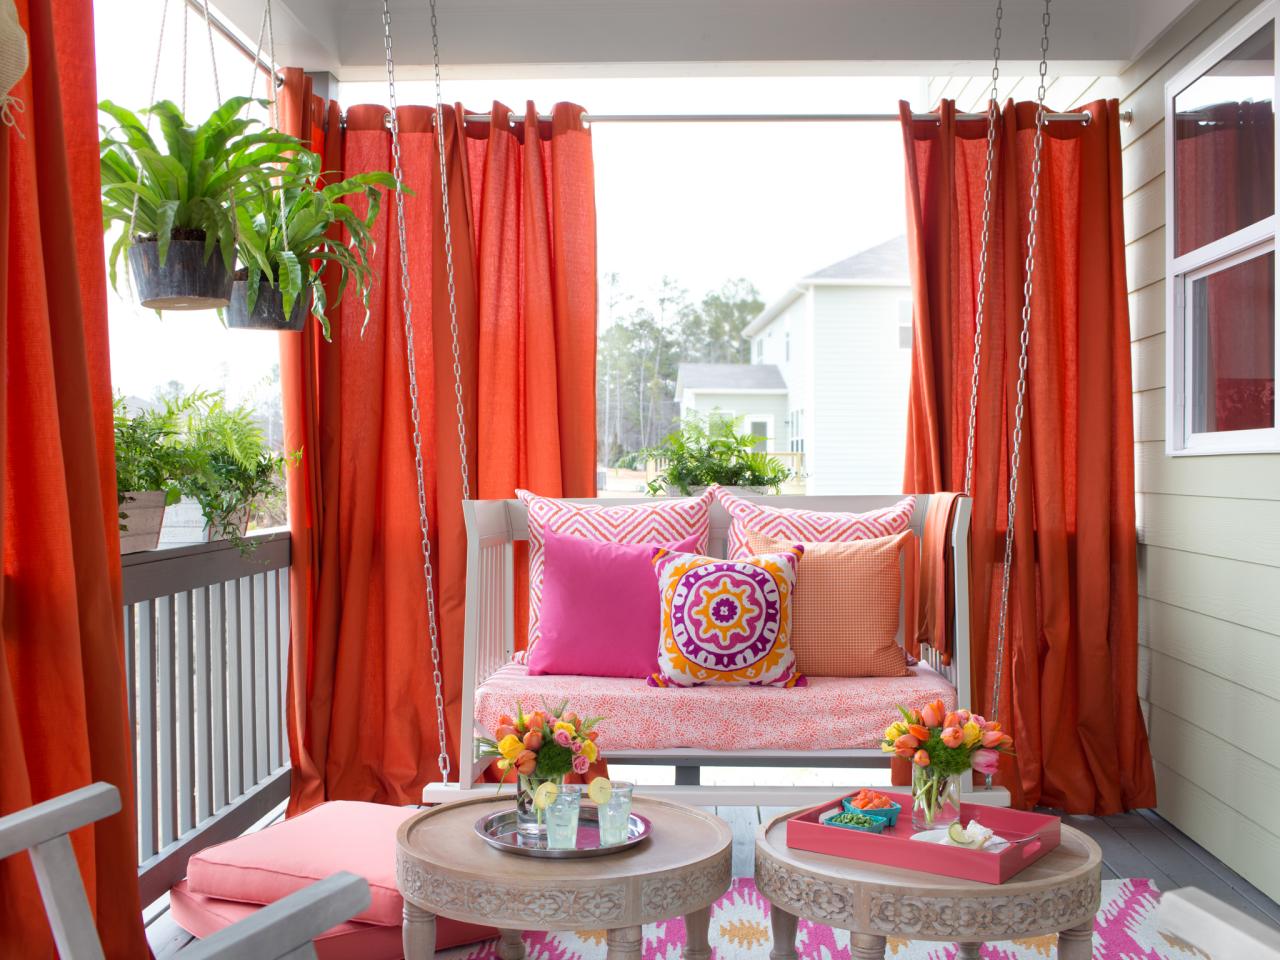 Install outdoor curtains